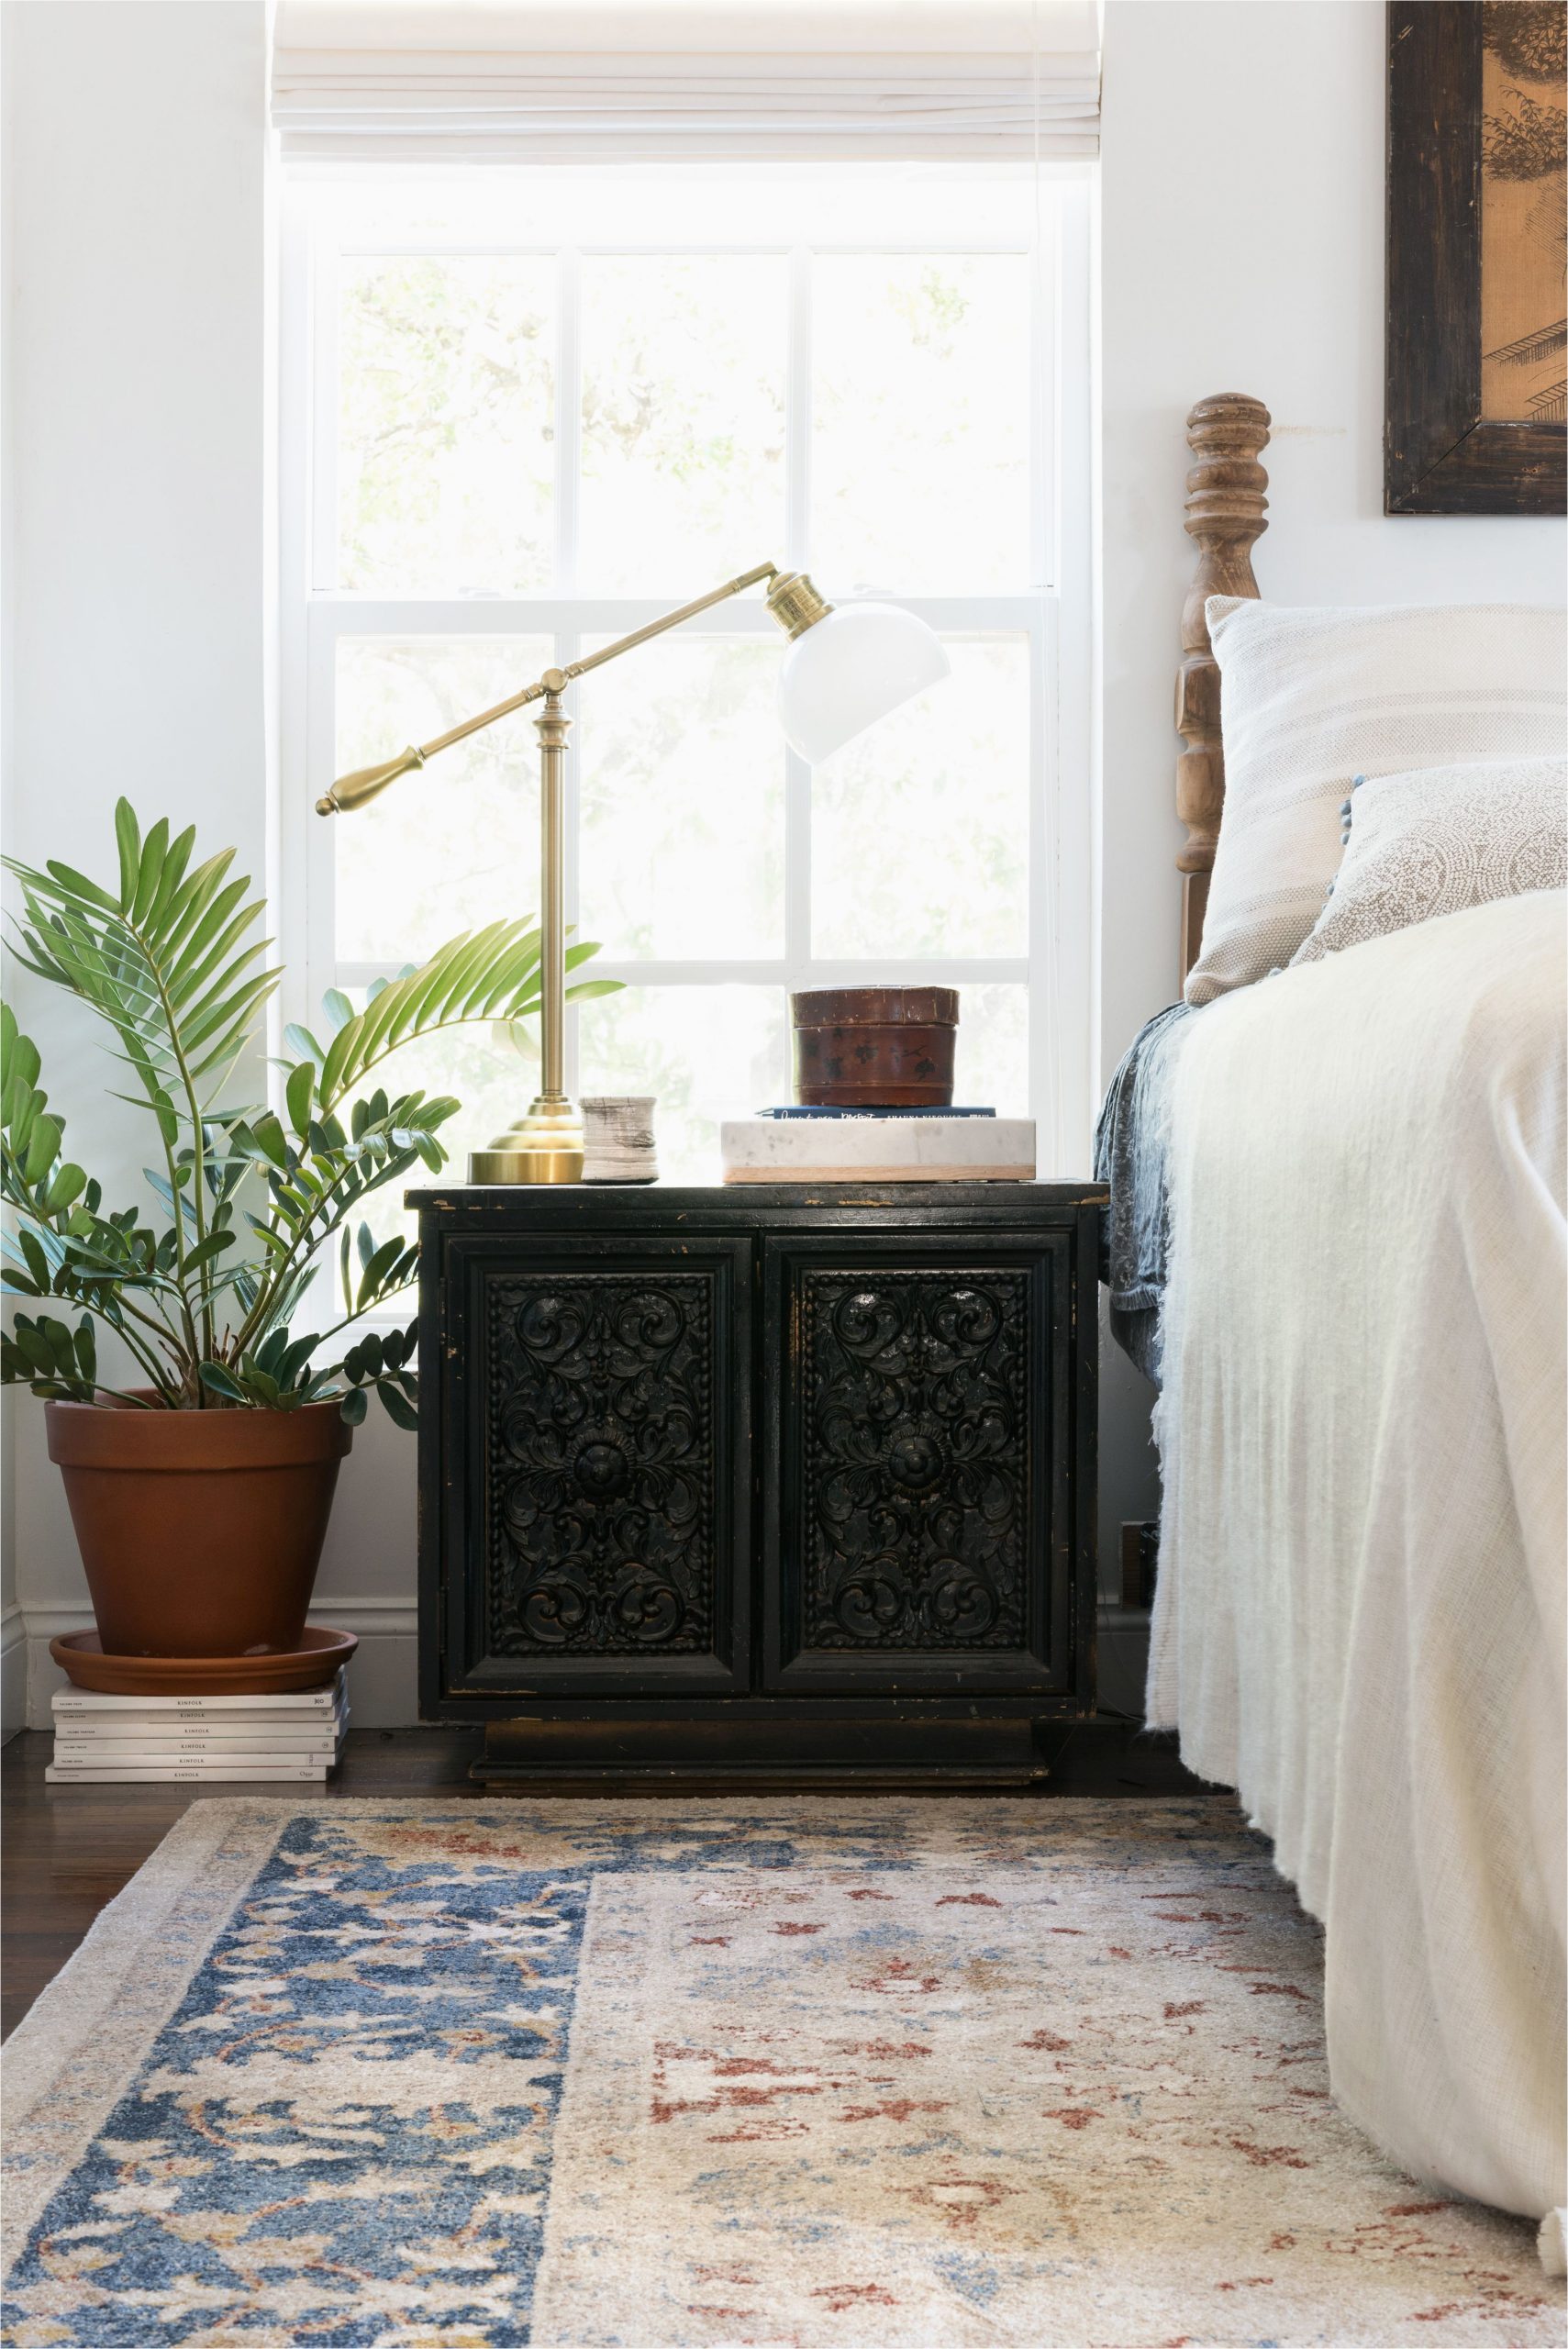 Magnolia Rugs Bed Bath and Beyond the Masterpiece Of the Master Bedroom the Magnolia Home by